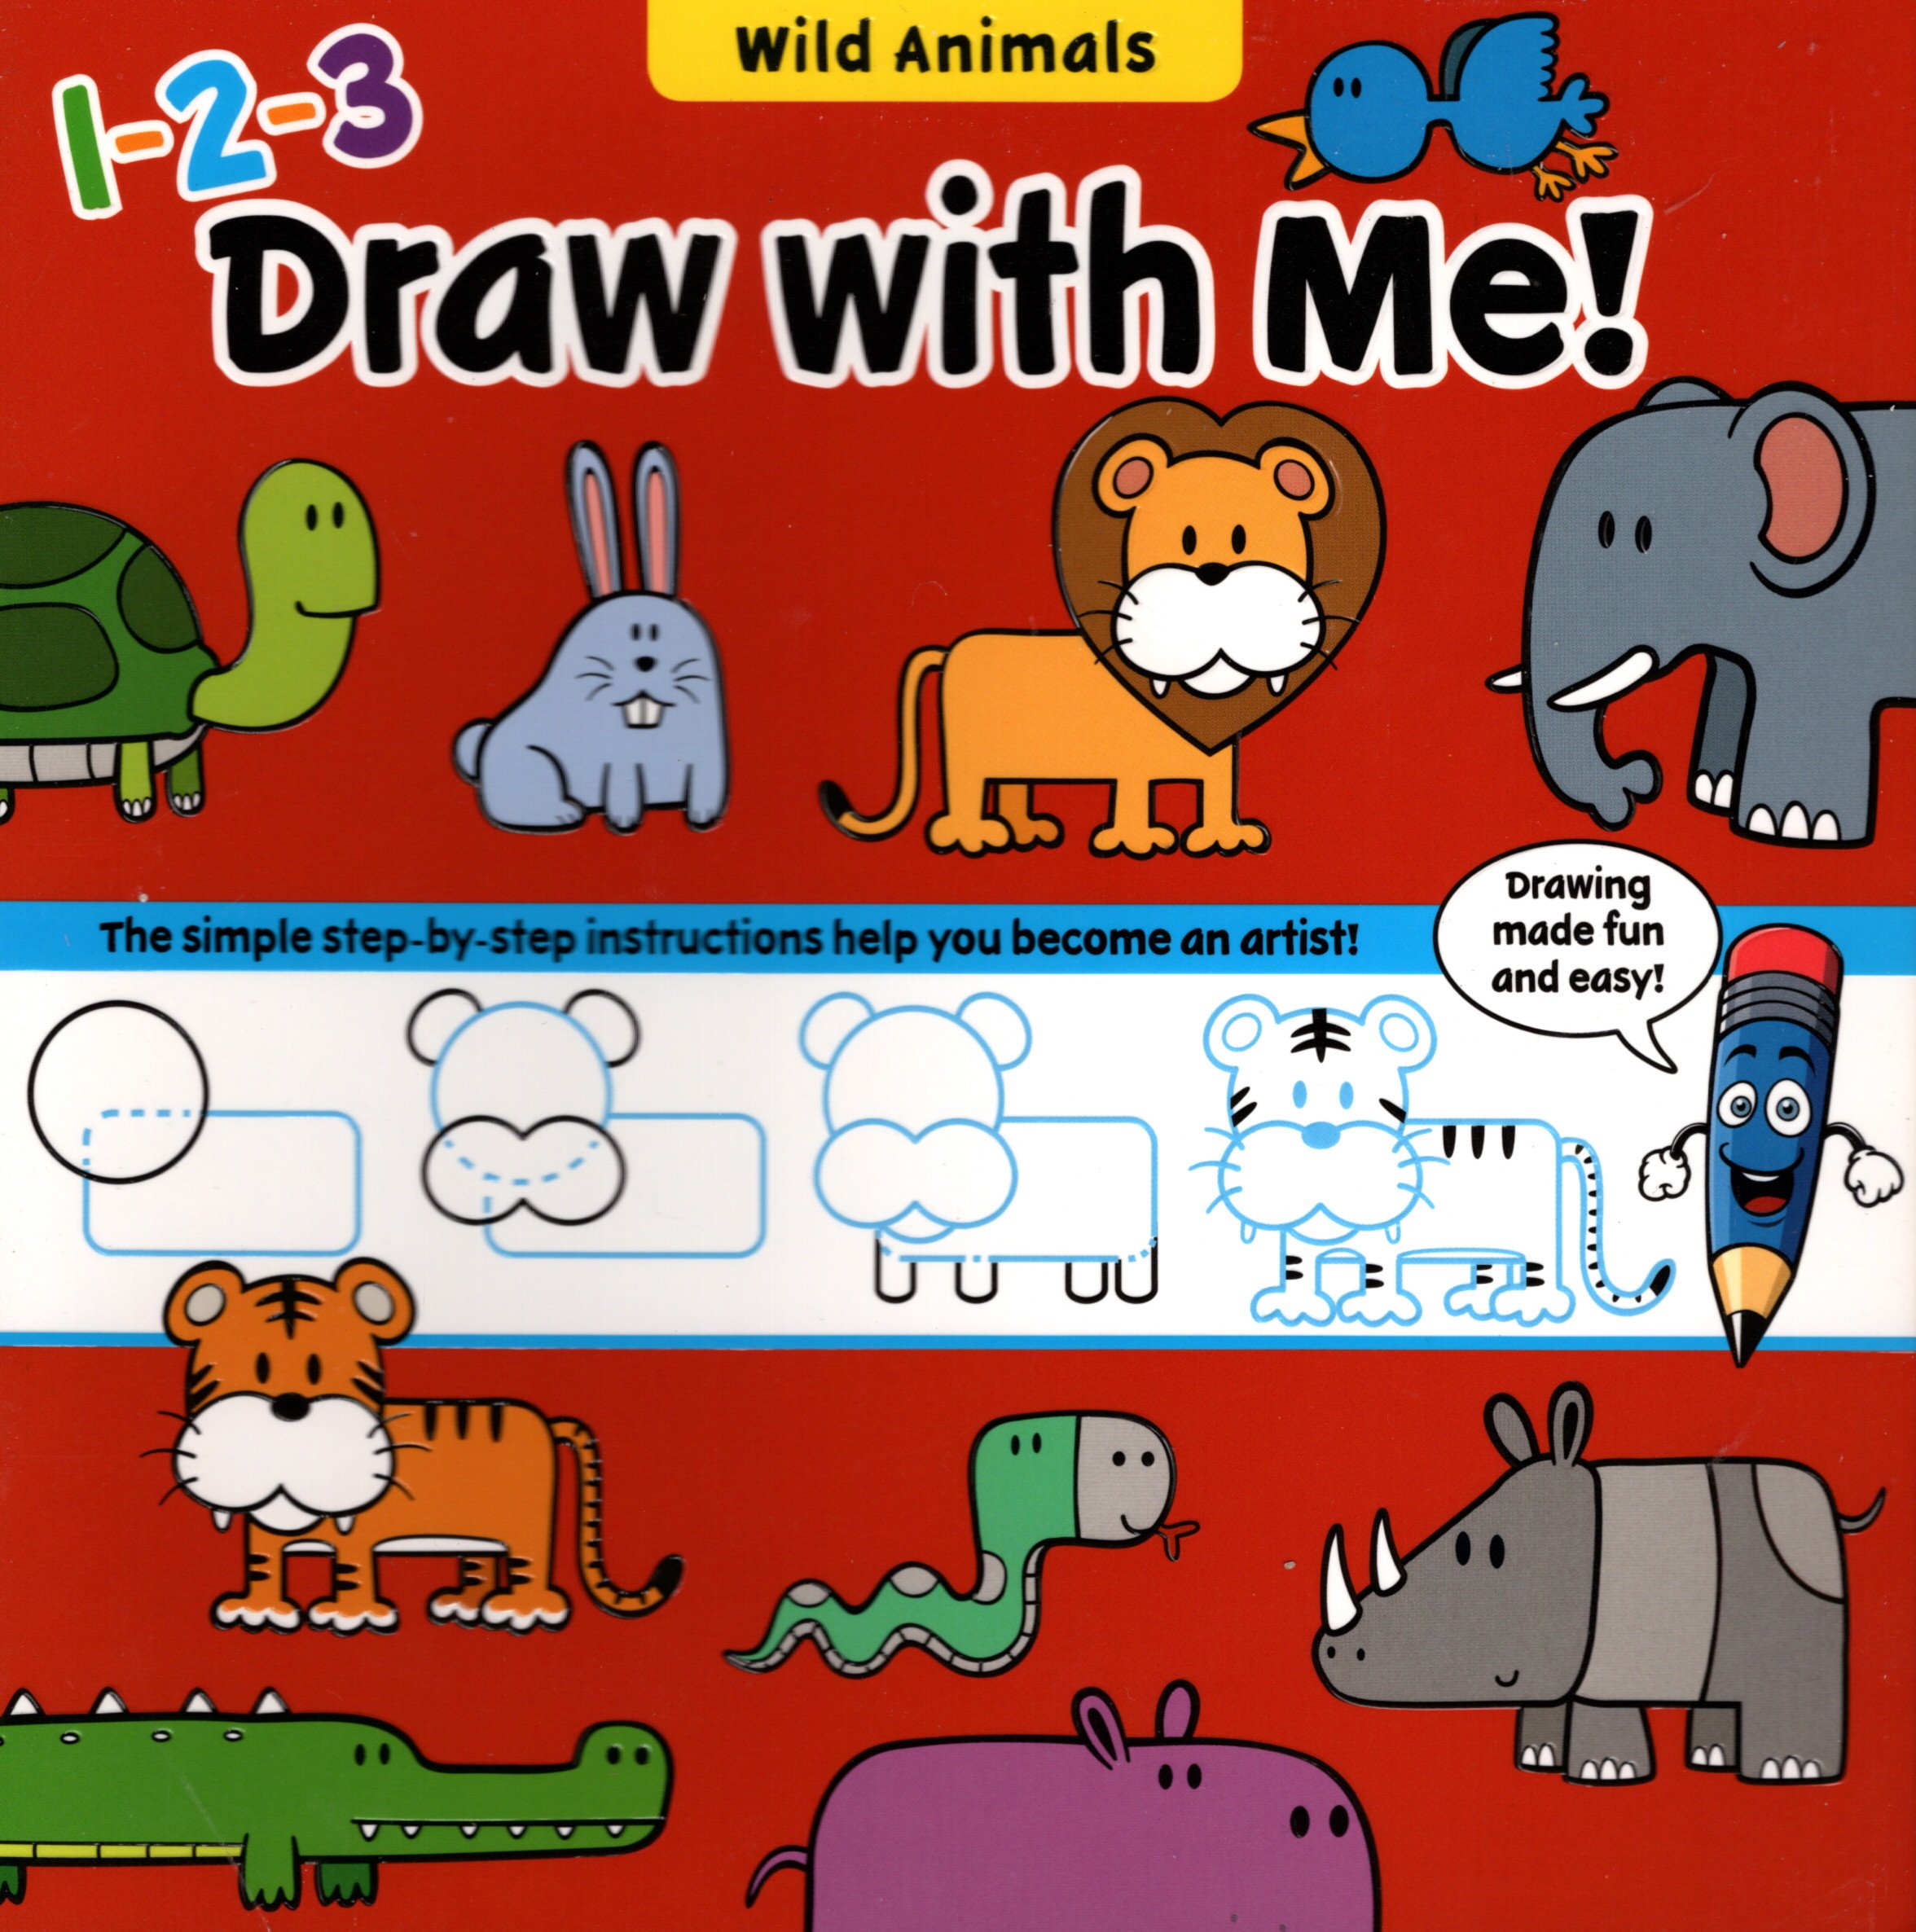 Flying Frog Wild Animals 1-2-3 Draw with Me!